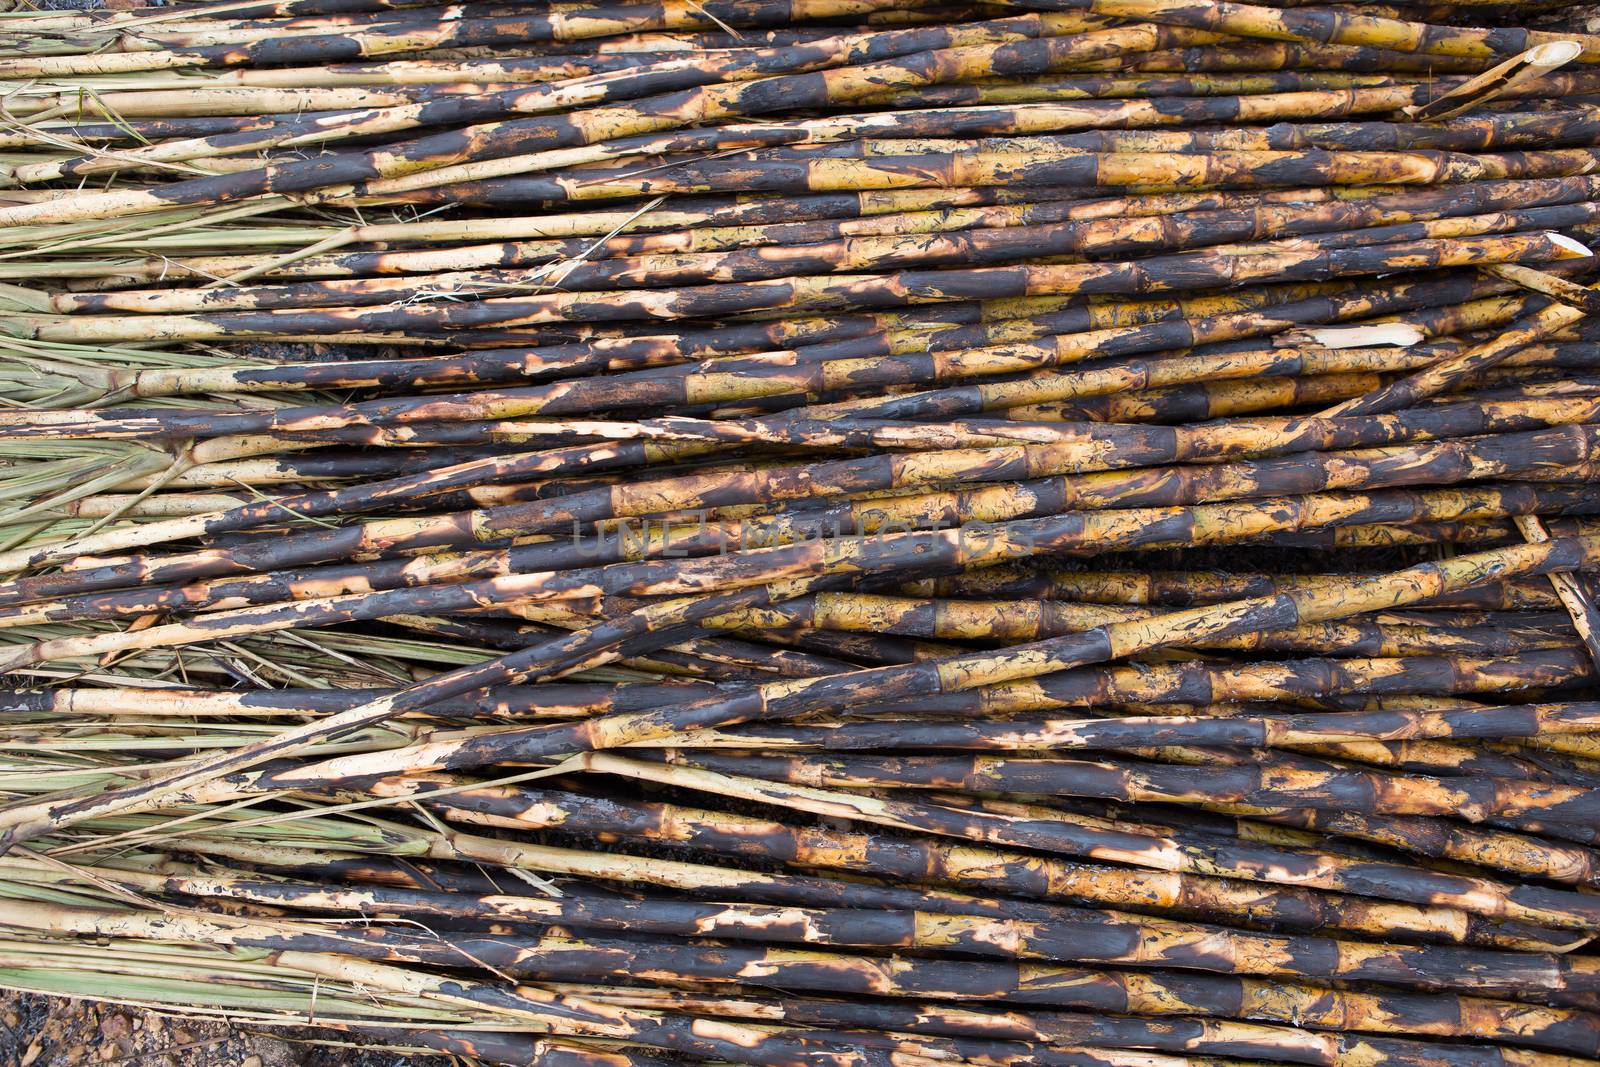 Sugarcane field fired by rufous